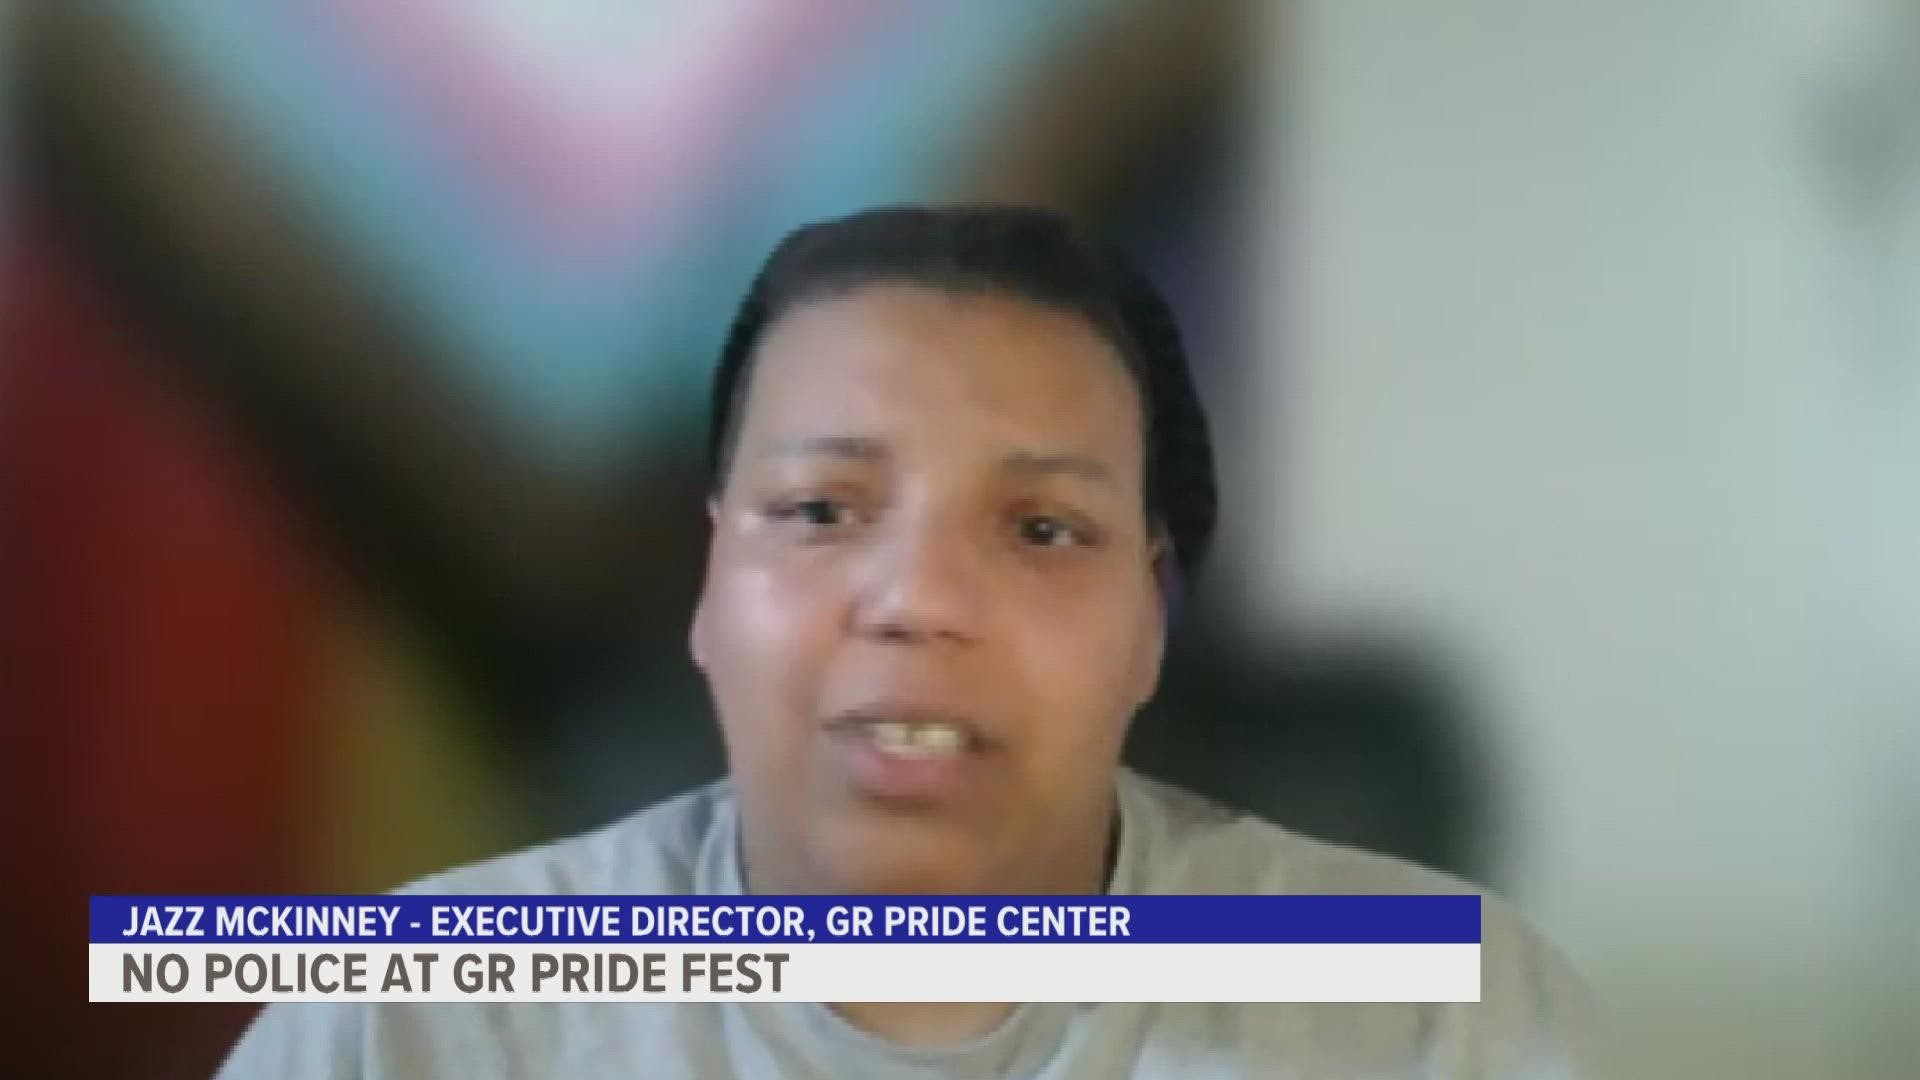 Grand Rapids Pride will not have a police presence after Jazz Mckinney, Executive Director of the GR Pride Center publicly stated they don't want them there.